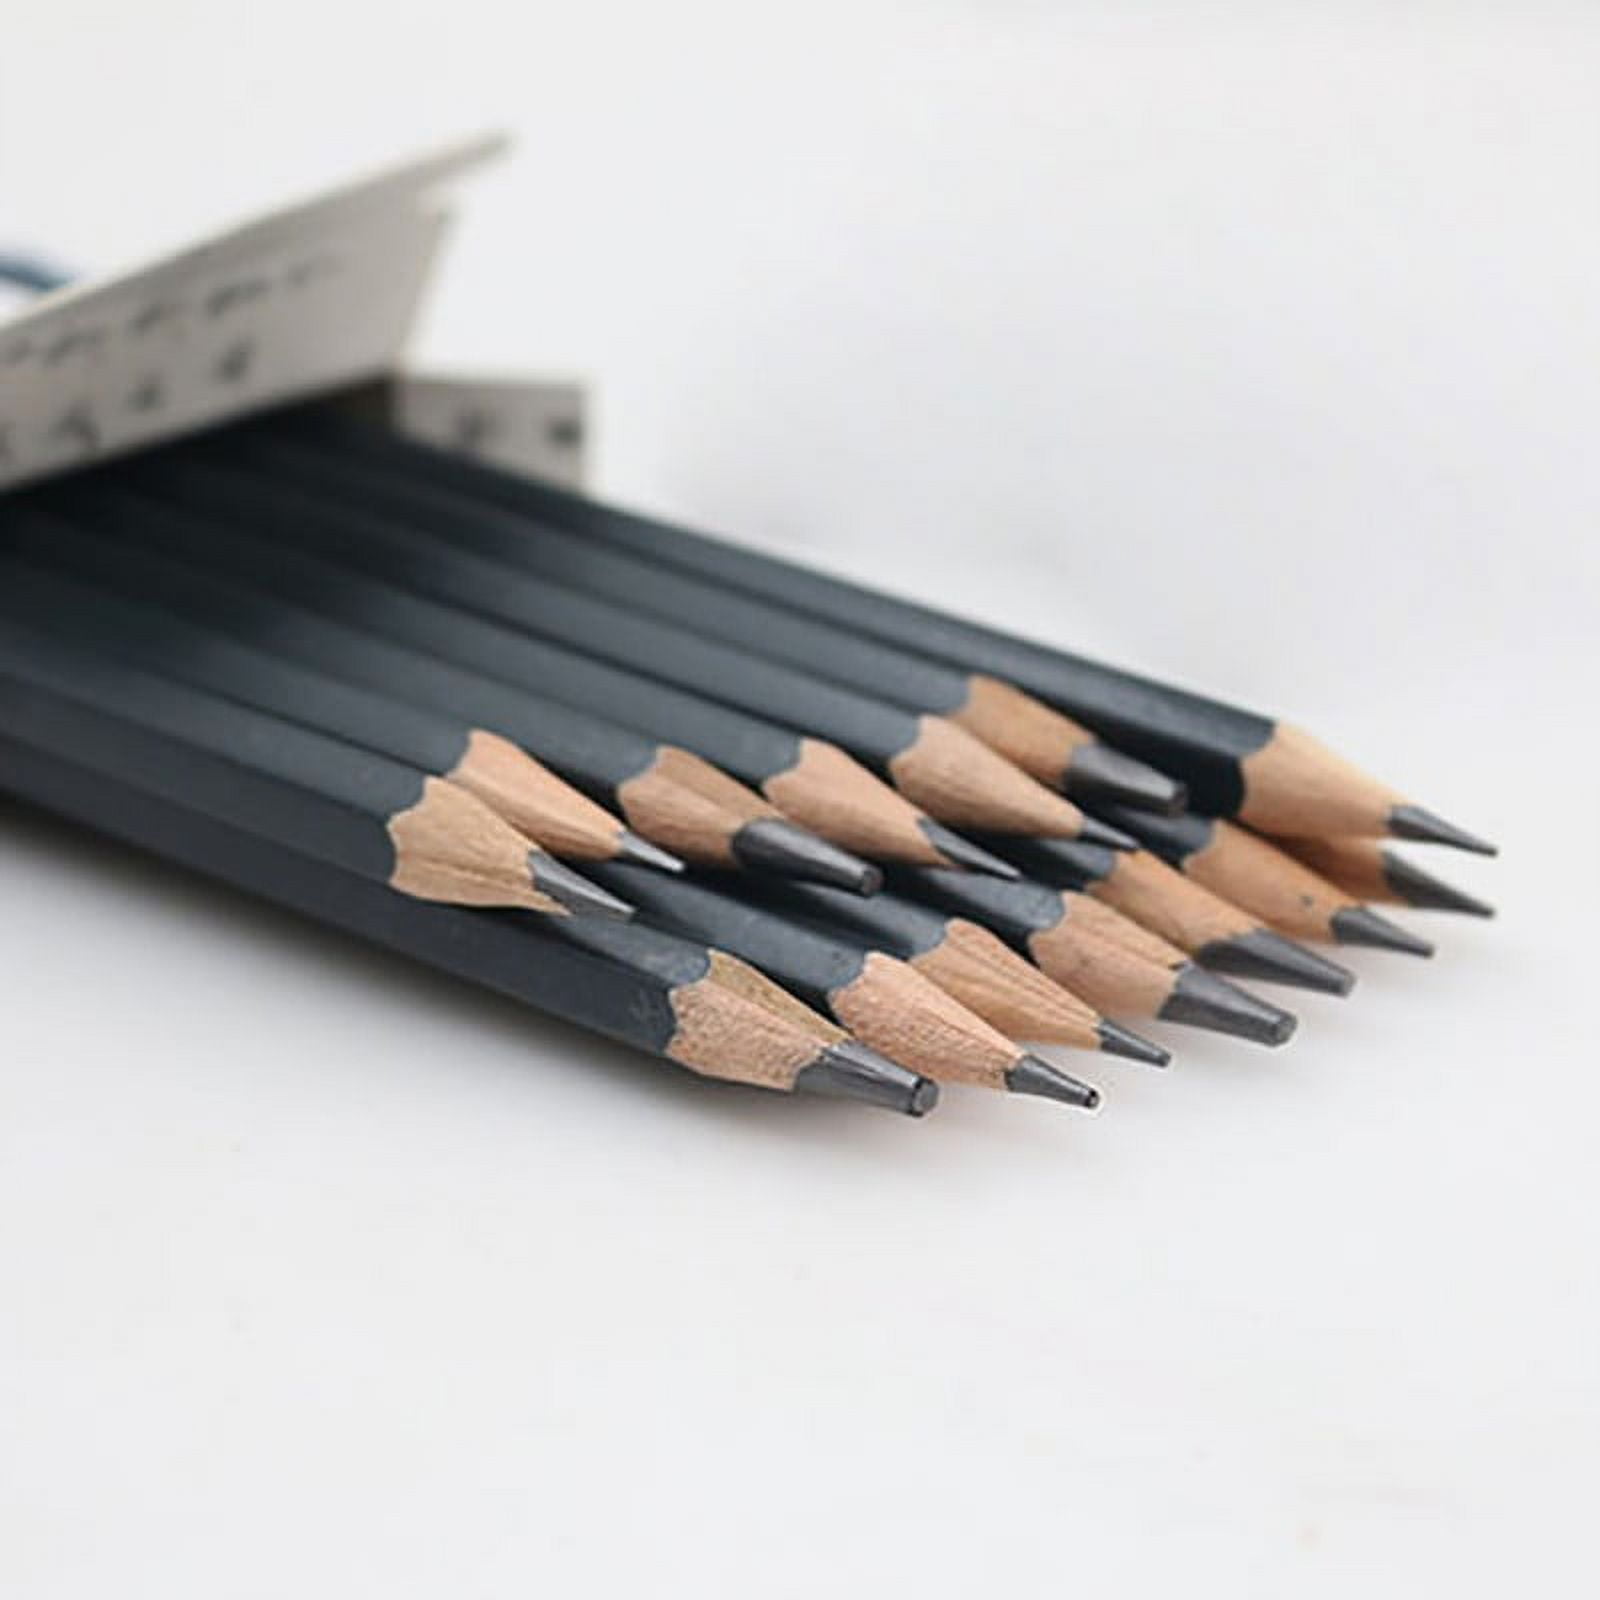 Faber-Castell Graphite Sketch Set, Sketching Pencil Set Art Set for Adults  and Beginners - Walmart.com